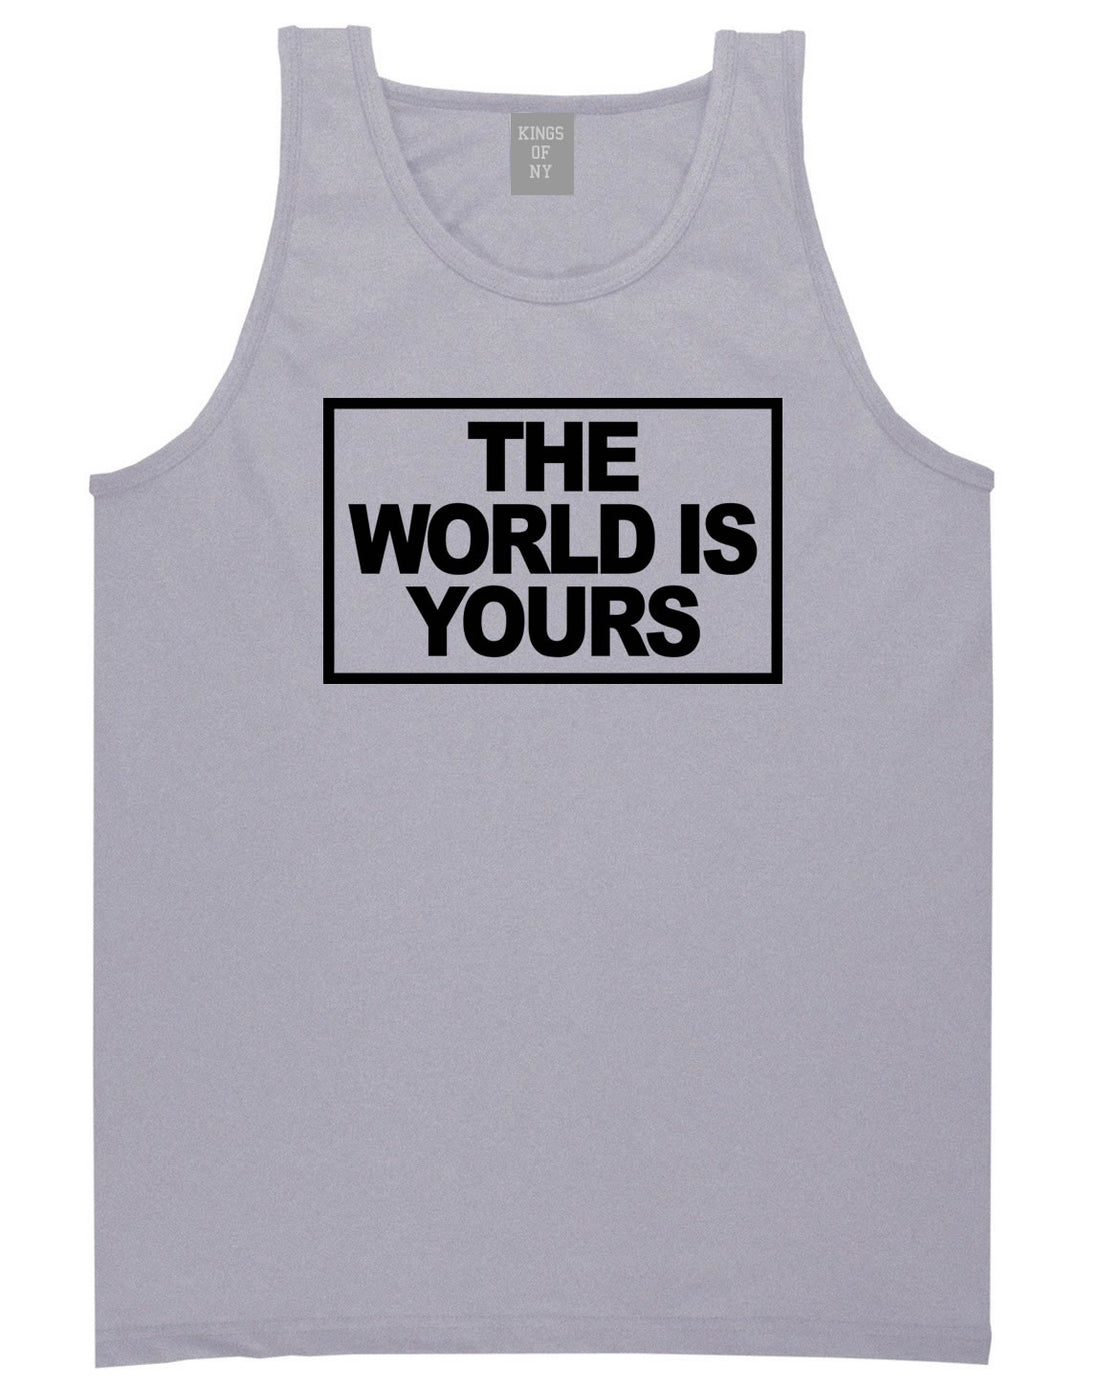 The World Is Yours Tank Top in Grey By Kings Of NY